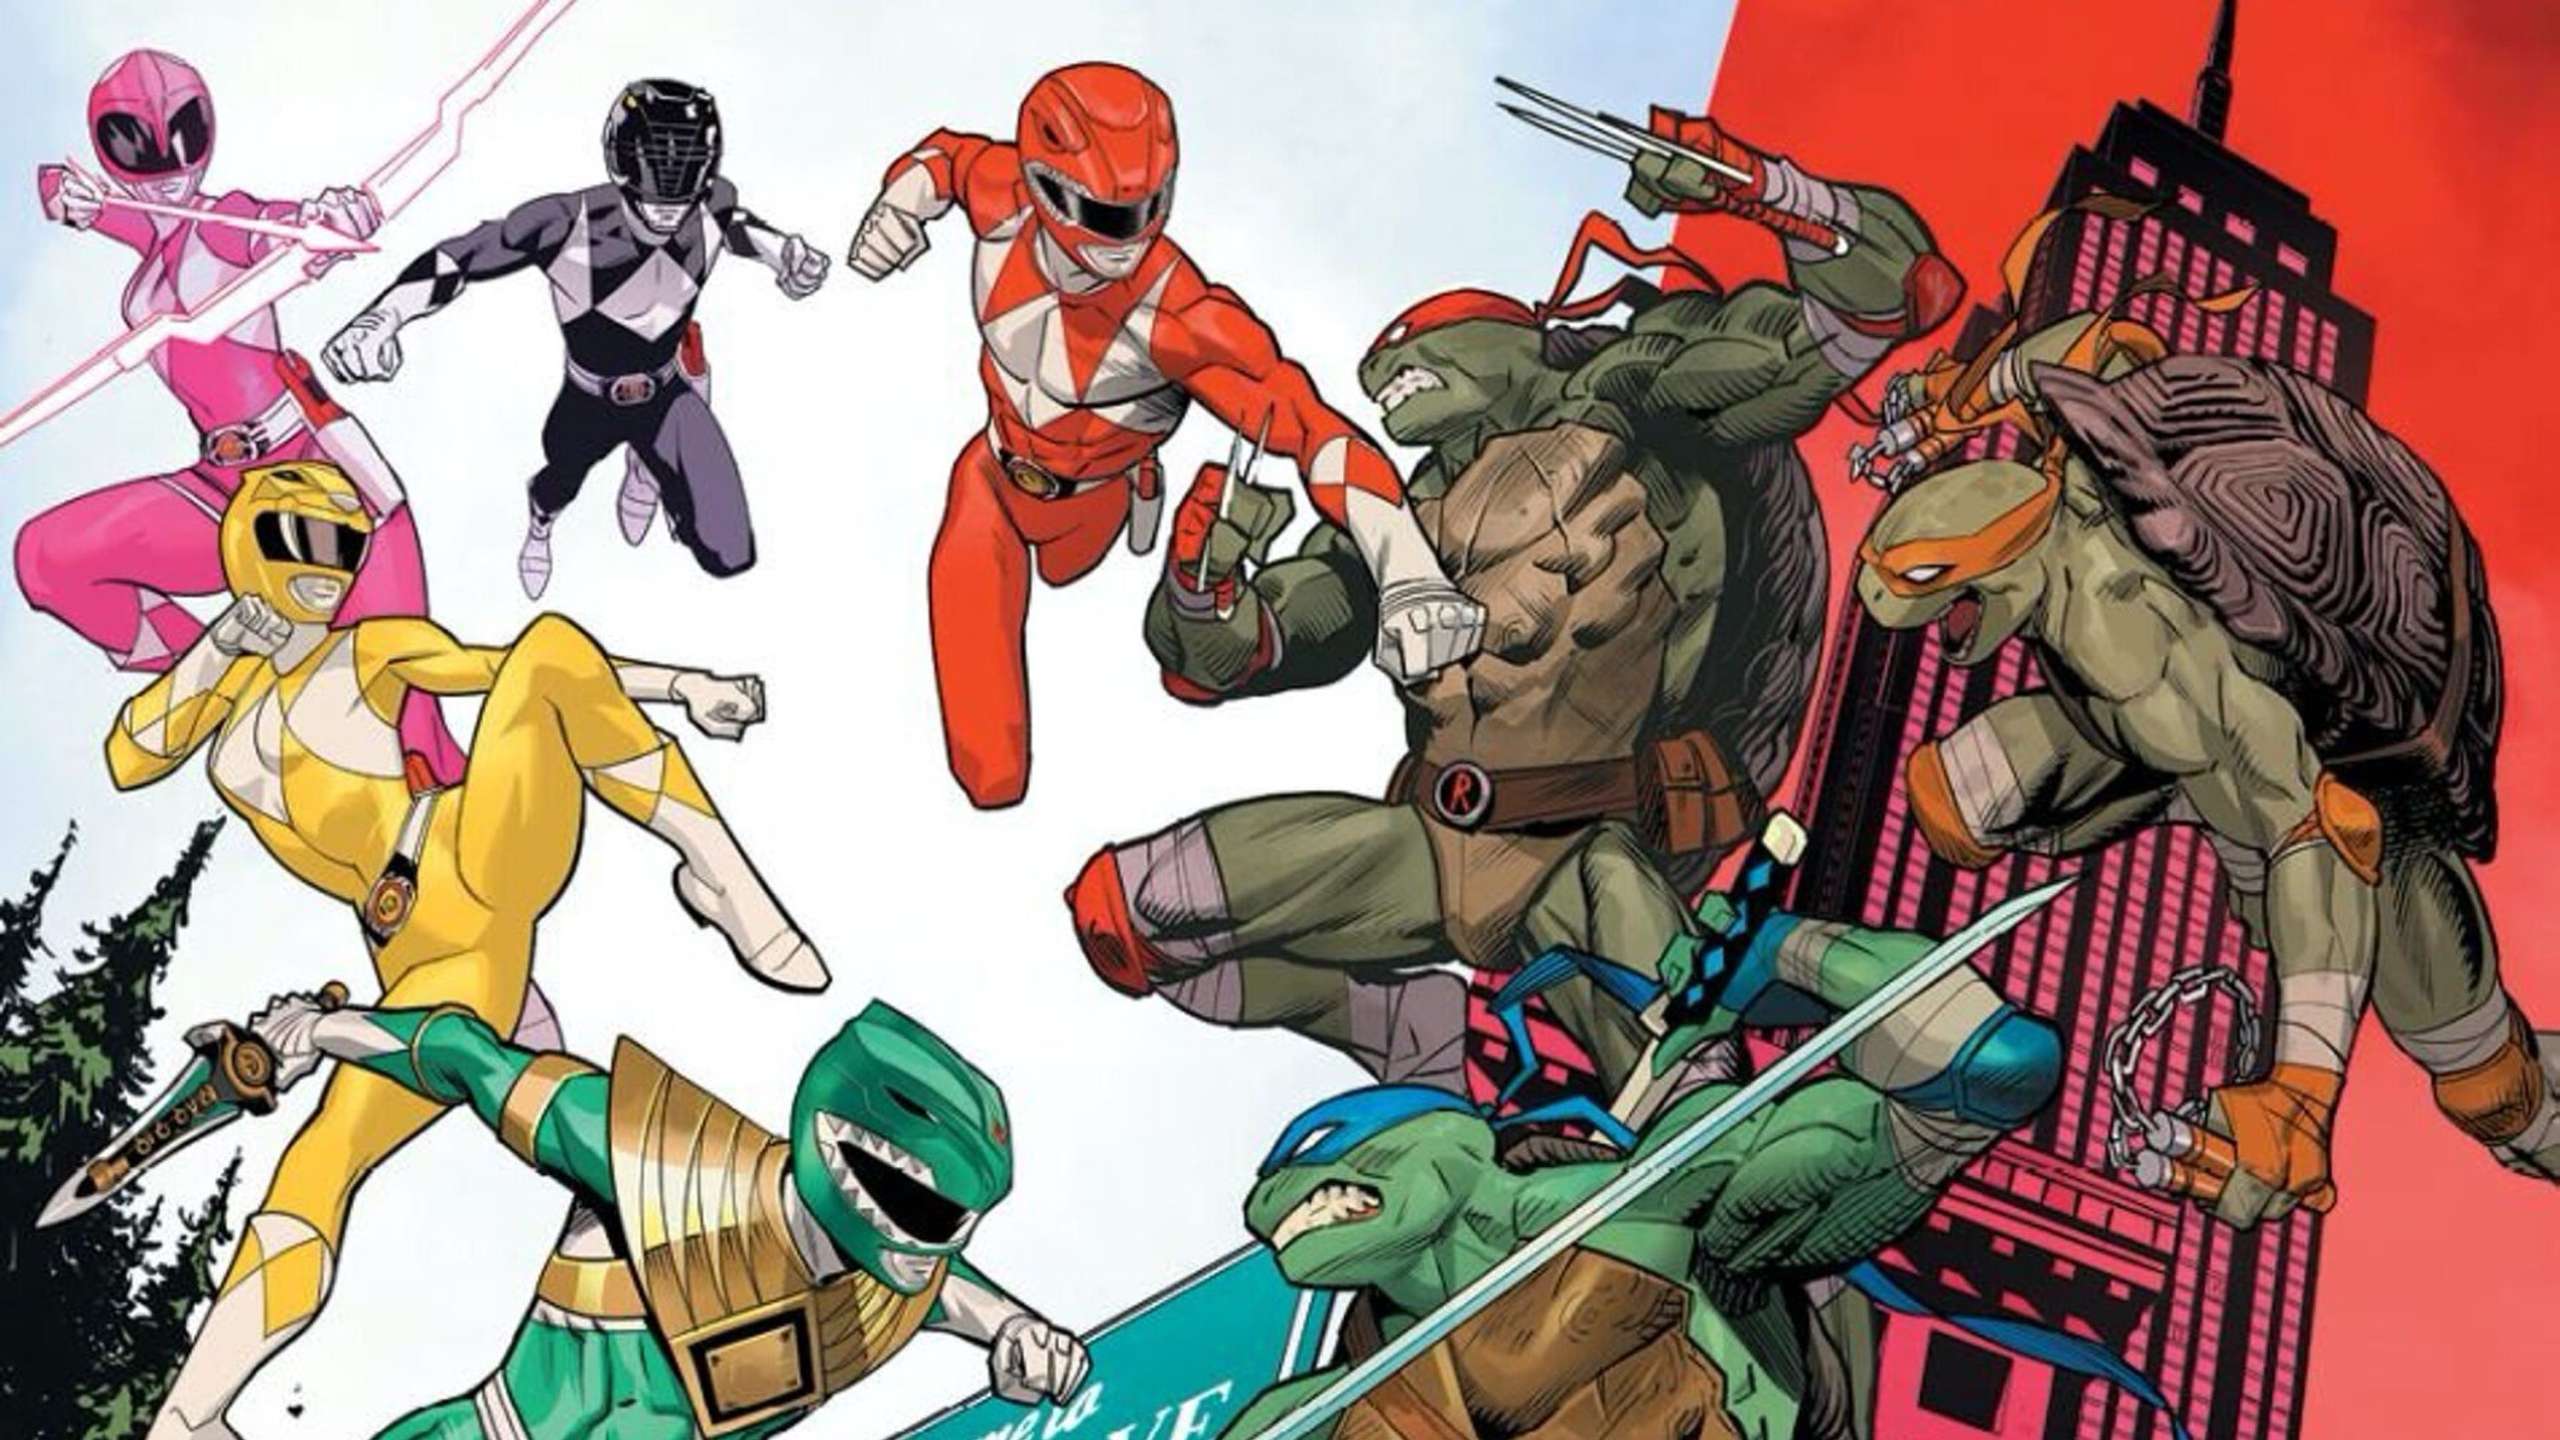 A Follow-Up To The Spectacular Mighty Morphin Power Rangers/Teenage Mutant Ninja Turtles Crossover Will Be Released By BOOM! Studios